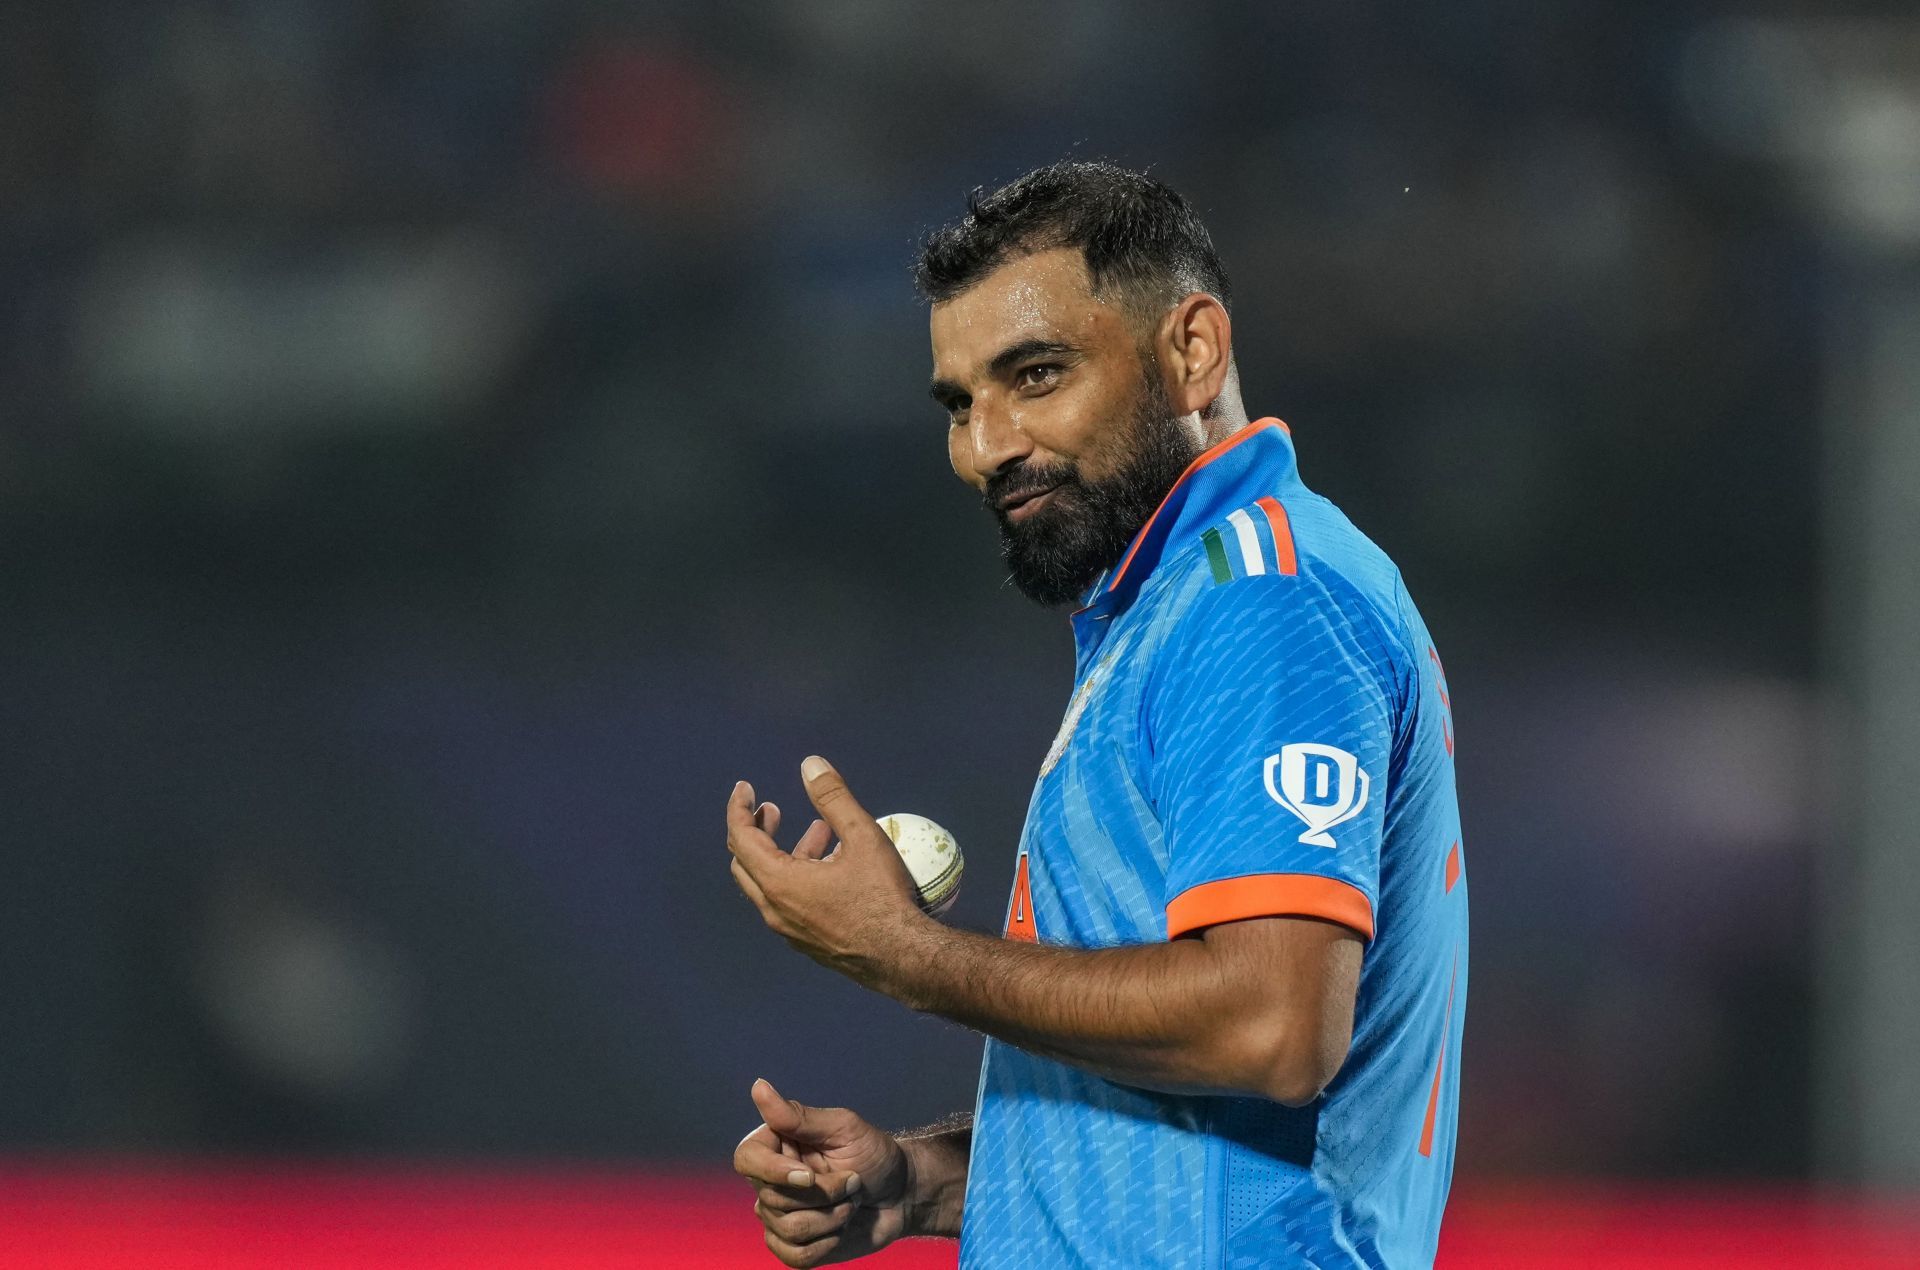 Mohammed Shami entered the playing XI and made an impact